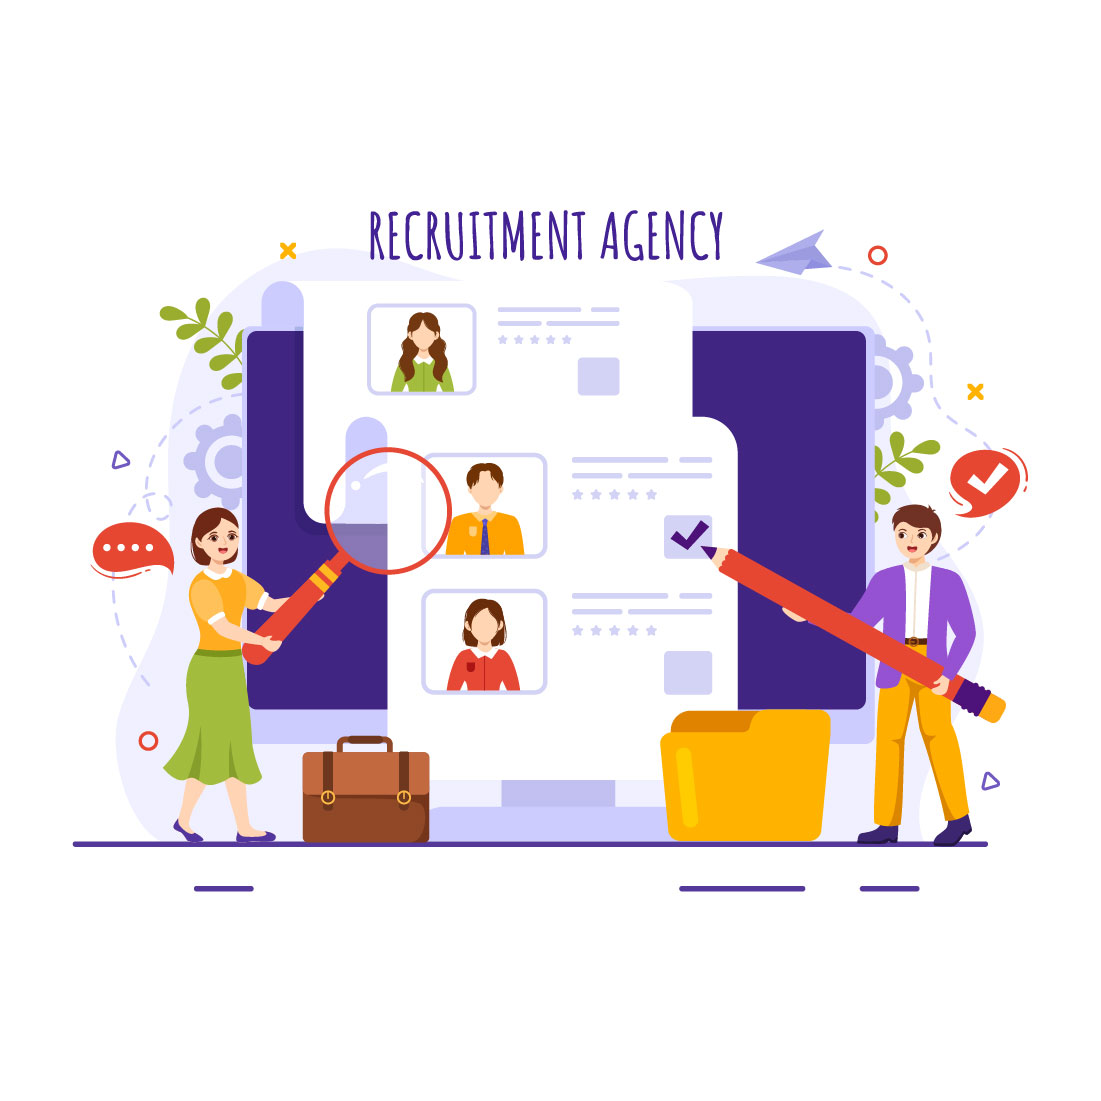 15 Recruitment Agency Illustration preview image.